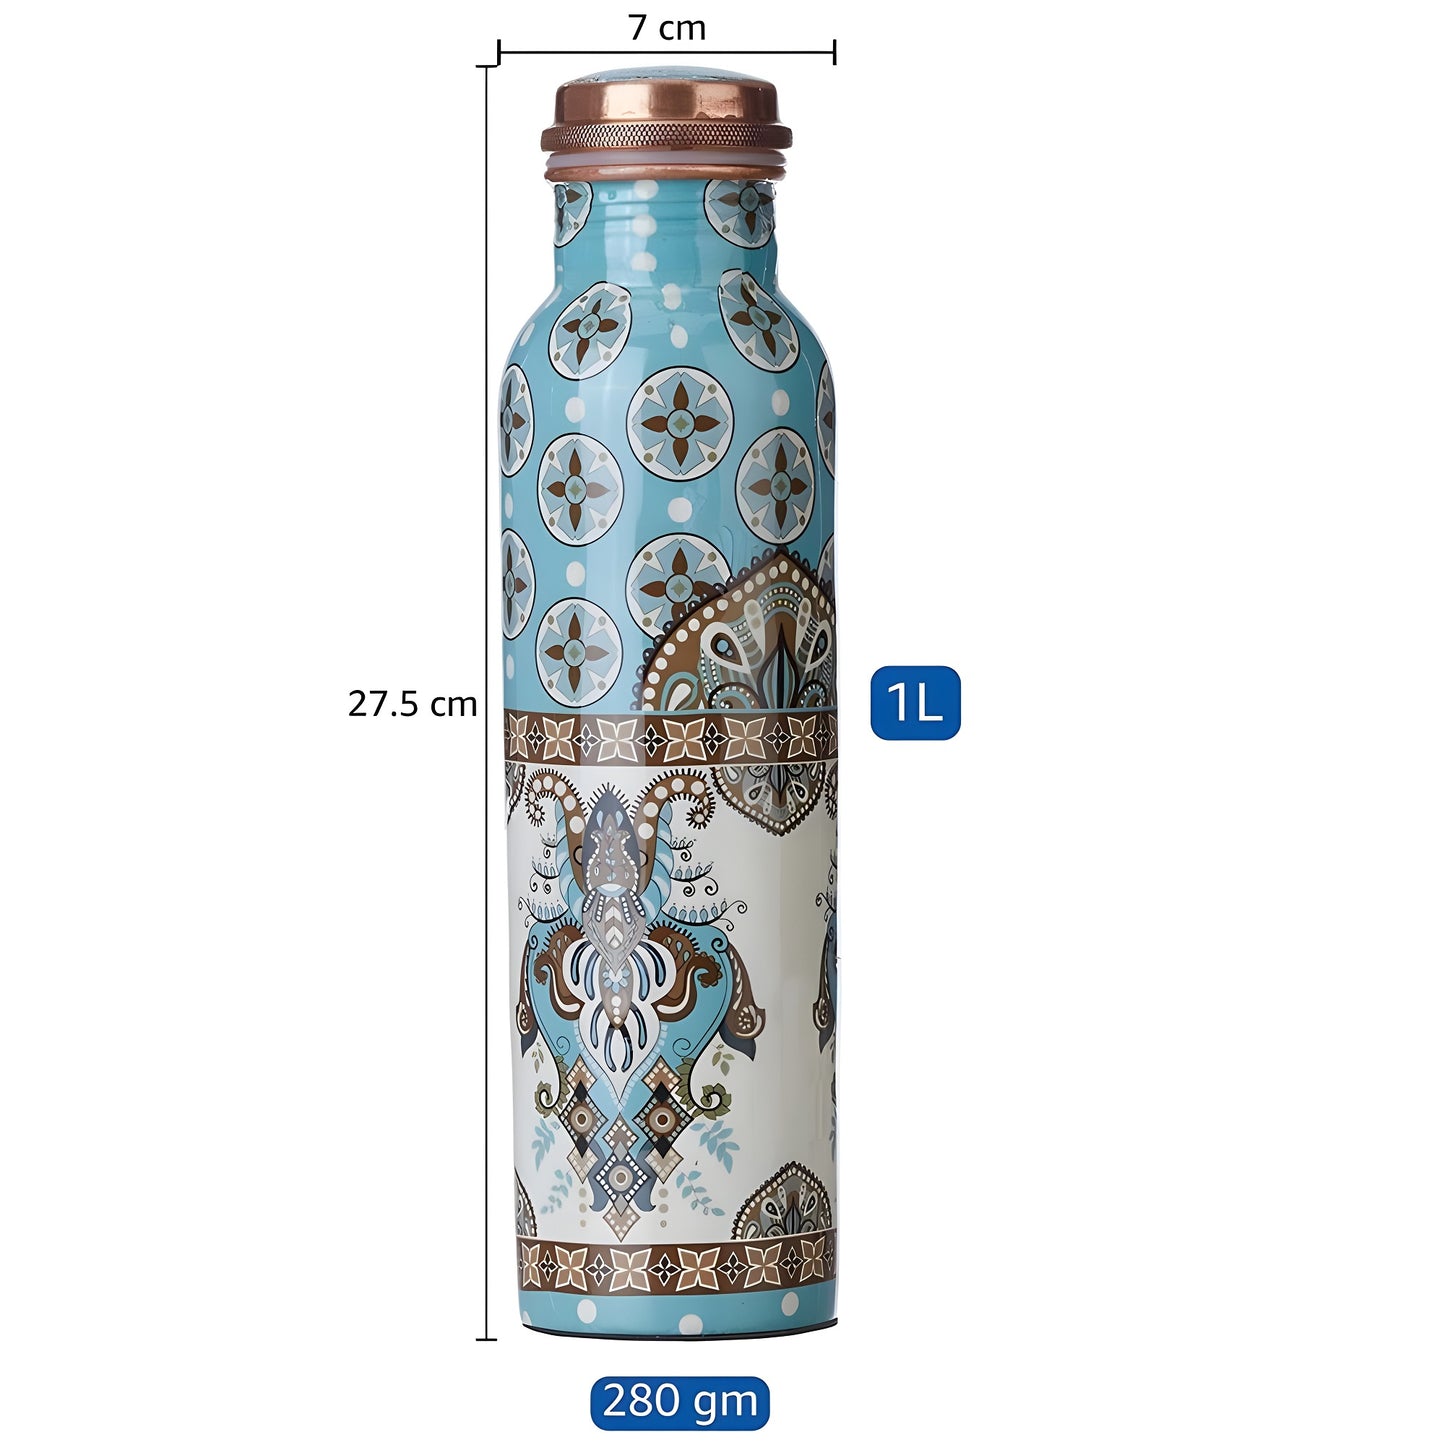 Printed copper bottle in usa size